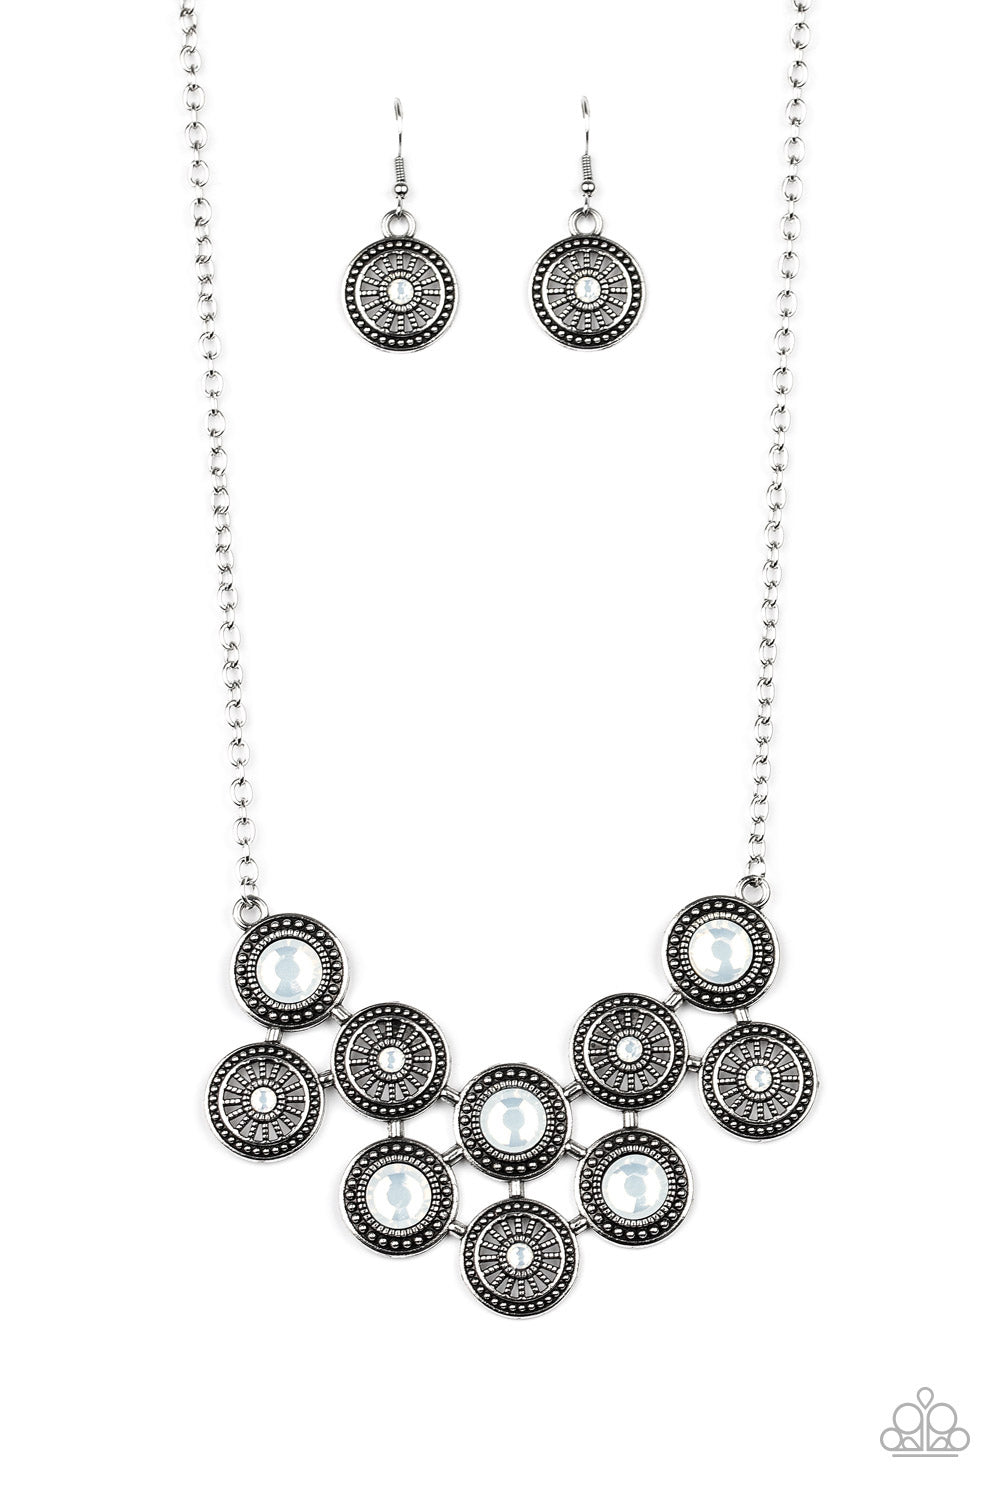 Paparazzi What's Your Star Sign? White Short Necklace - Life Of The Party April 2020